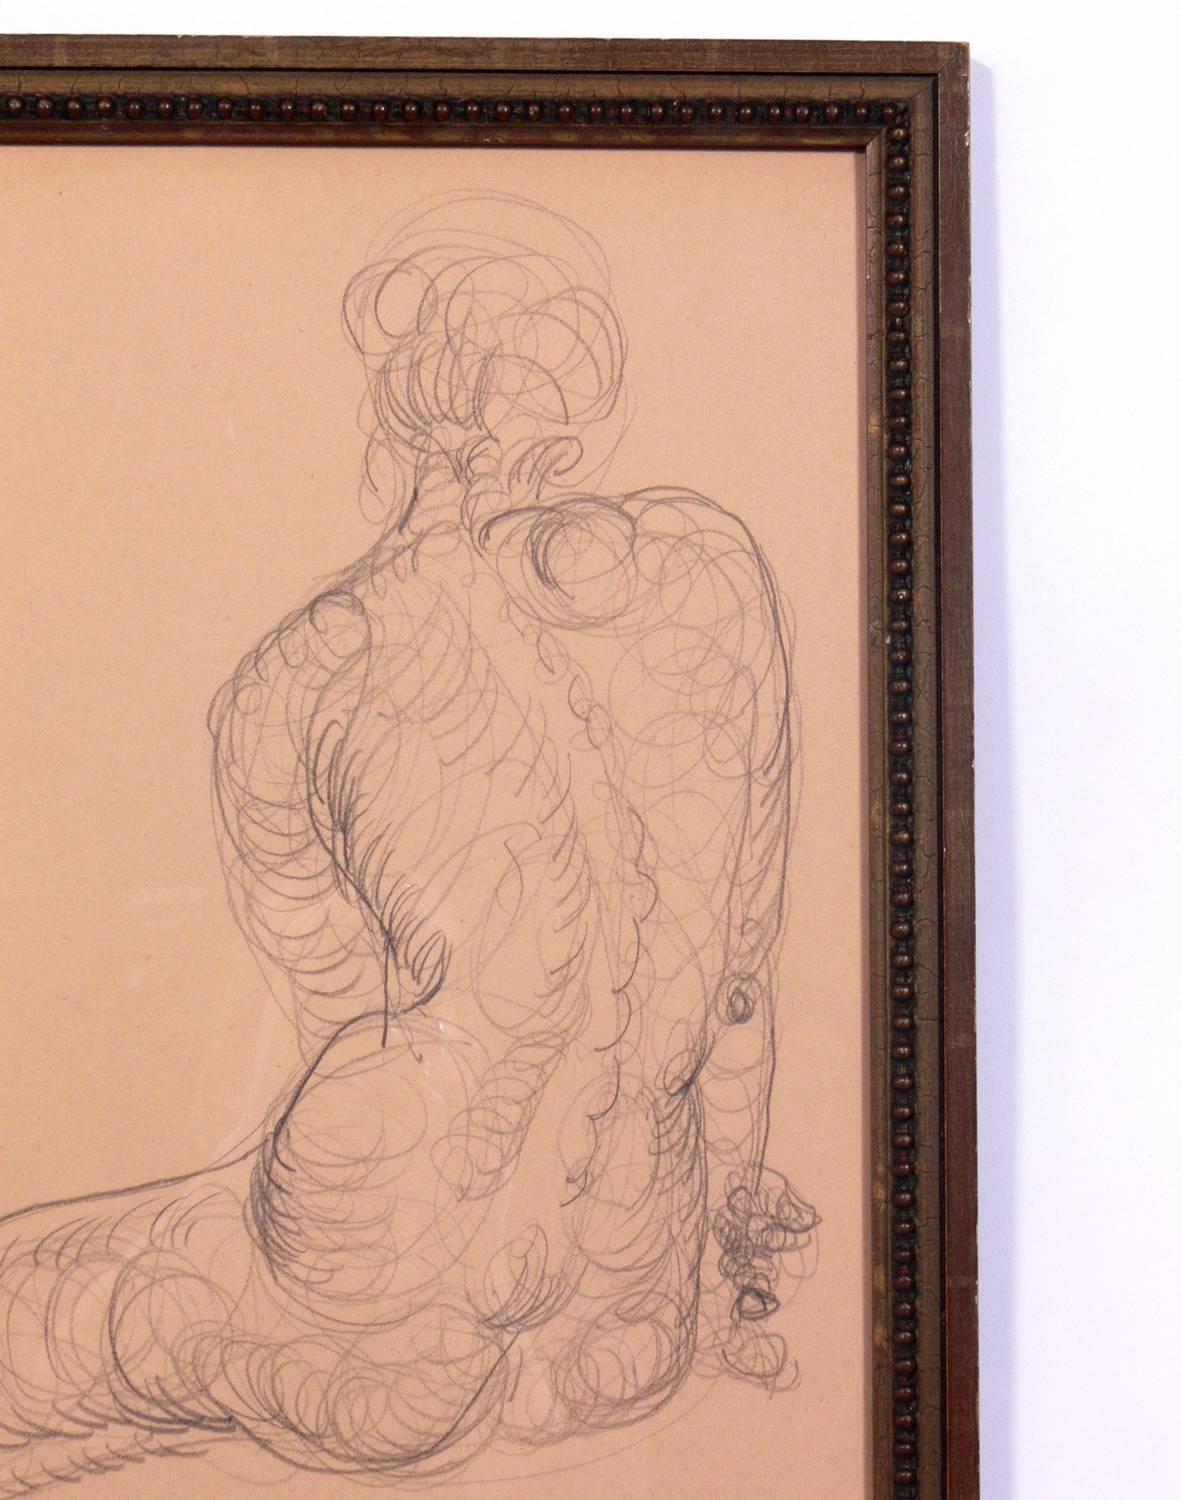 Selection of Figural Line Drawings or Gallery Wall by Miriam Kubach 3